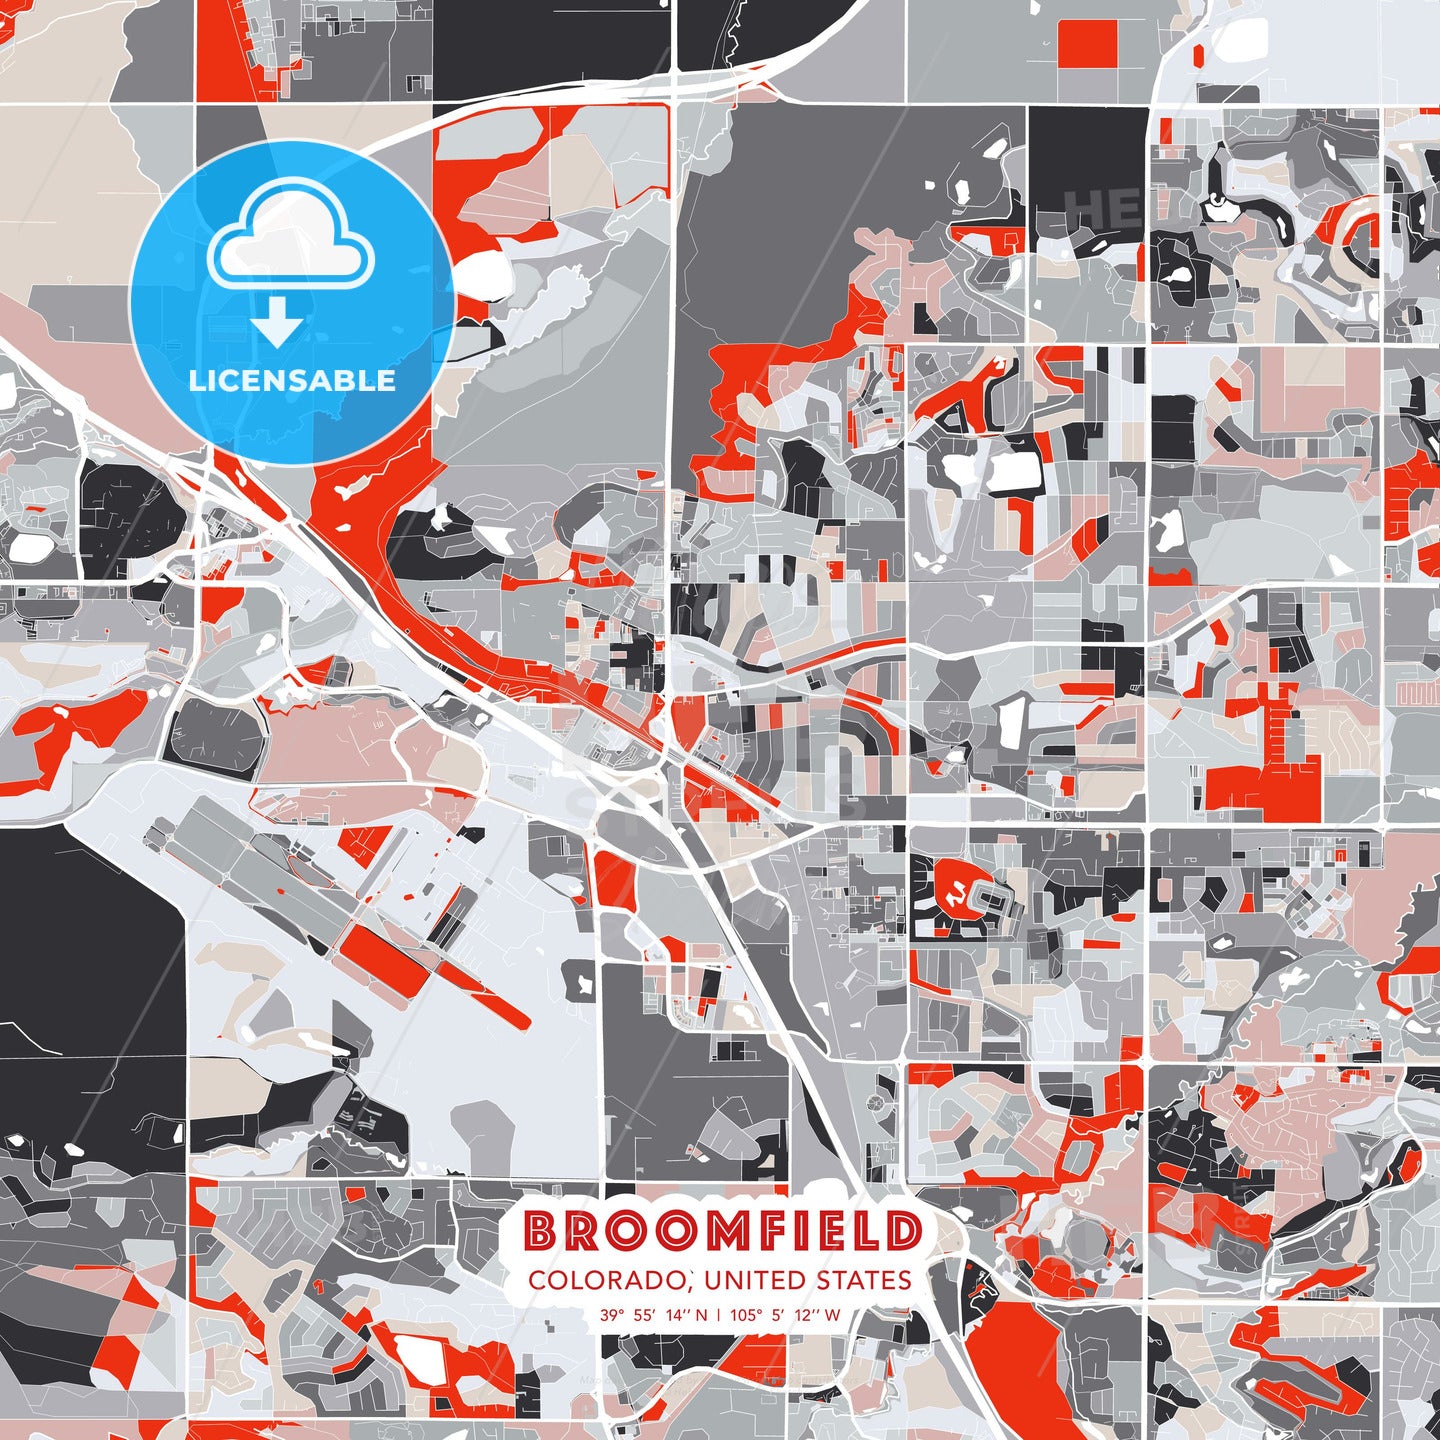 Broomfield, Colorado, United States, modern map - HEBSTREITS Sketches